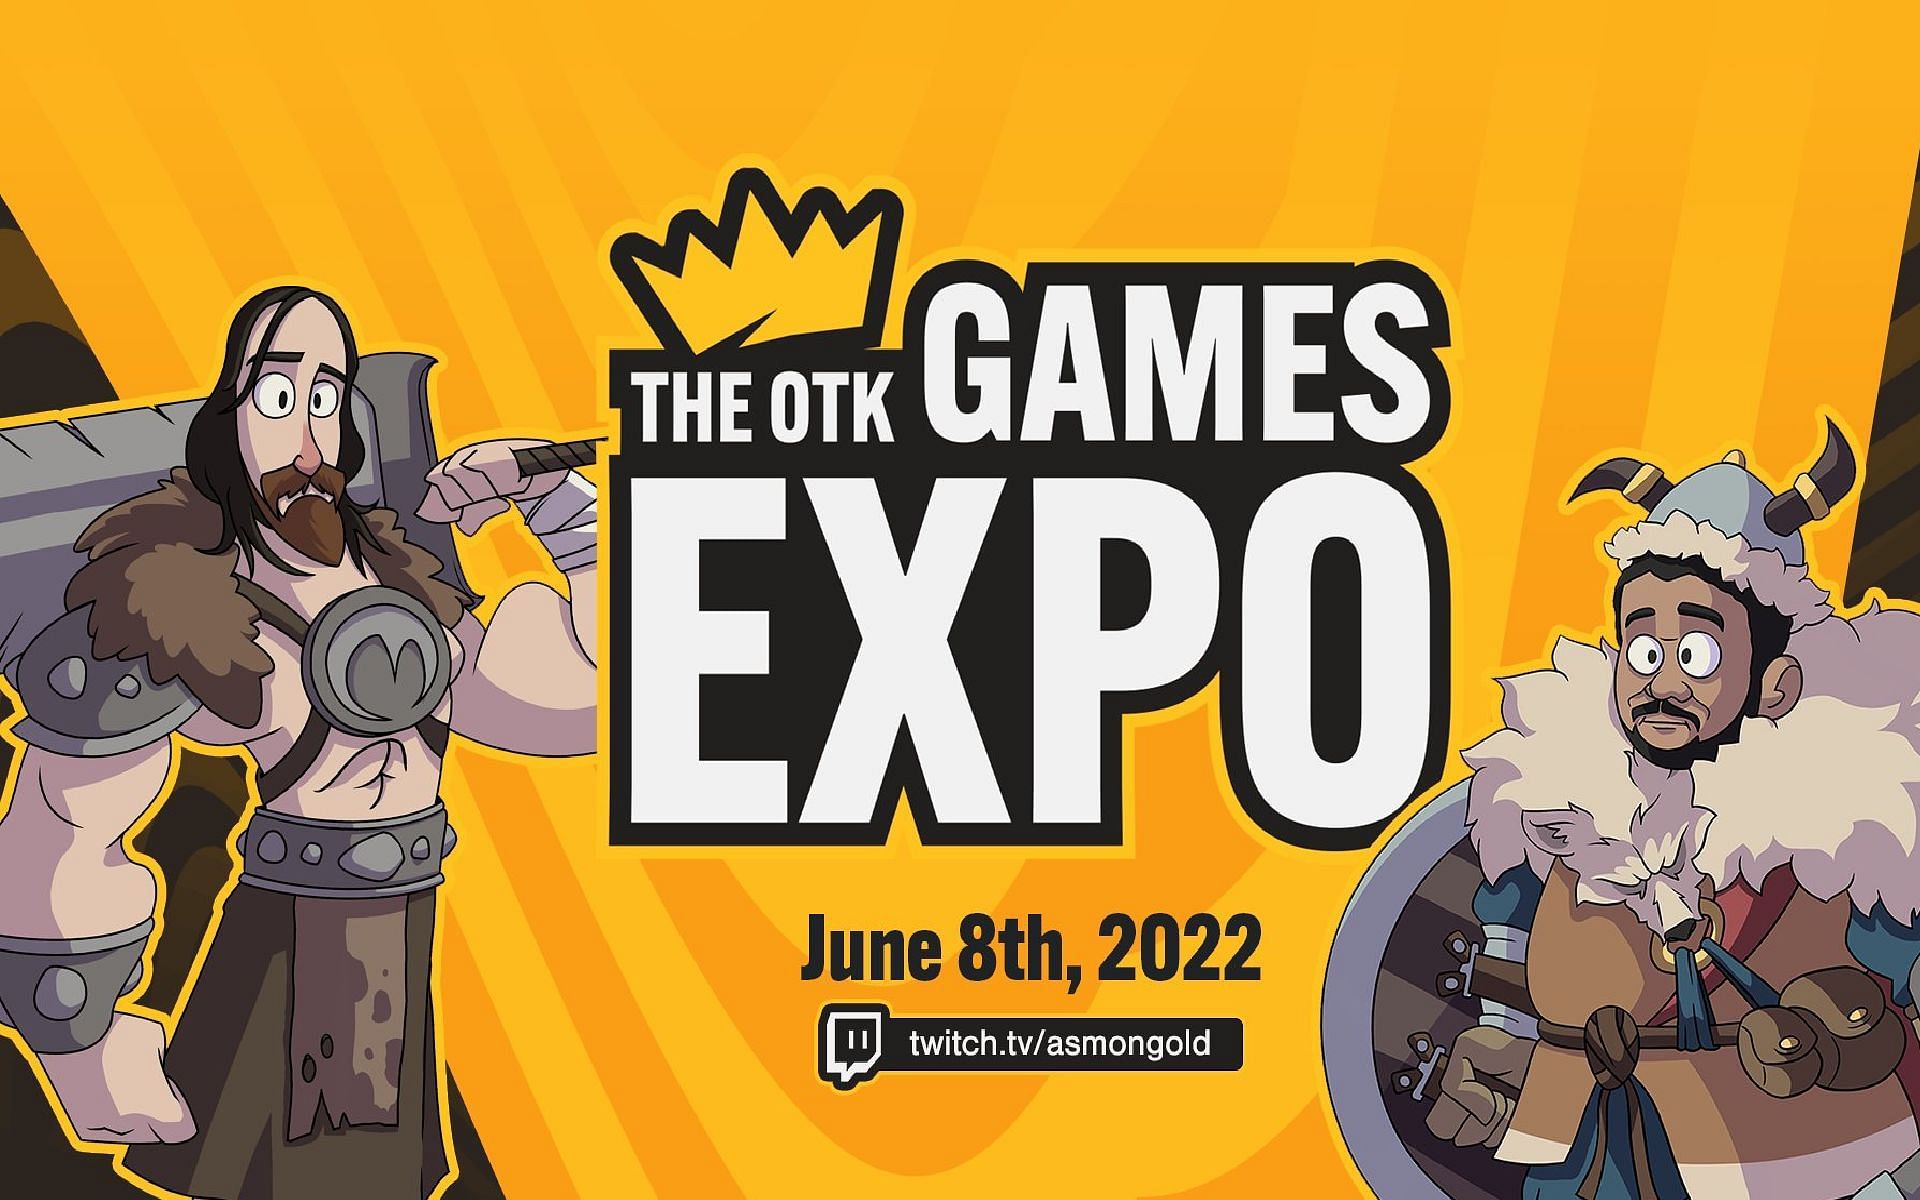 The One True King Game Expo will premiere on June 8, 2022 (Image via OTK/Twitter)